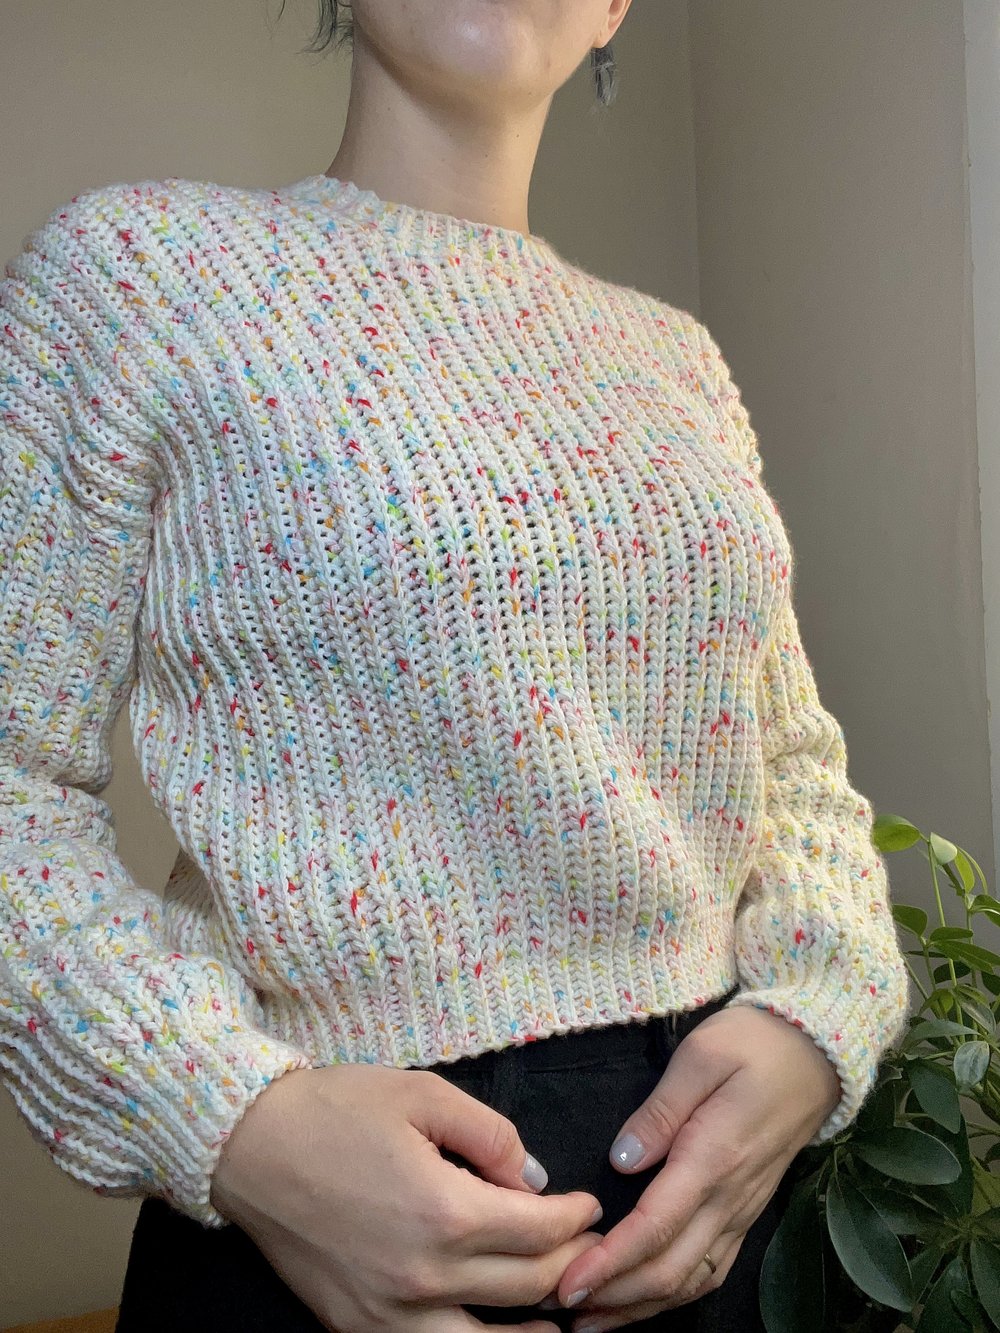 Snowed In Pullover: Christmas Granny Square Sweater — Just The Worsted, Modern Crochet Patterns